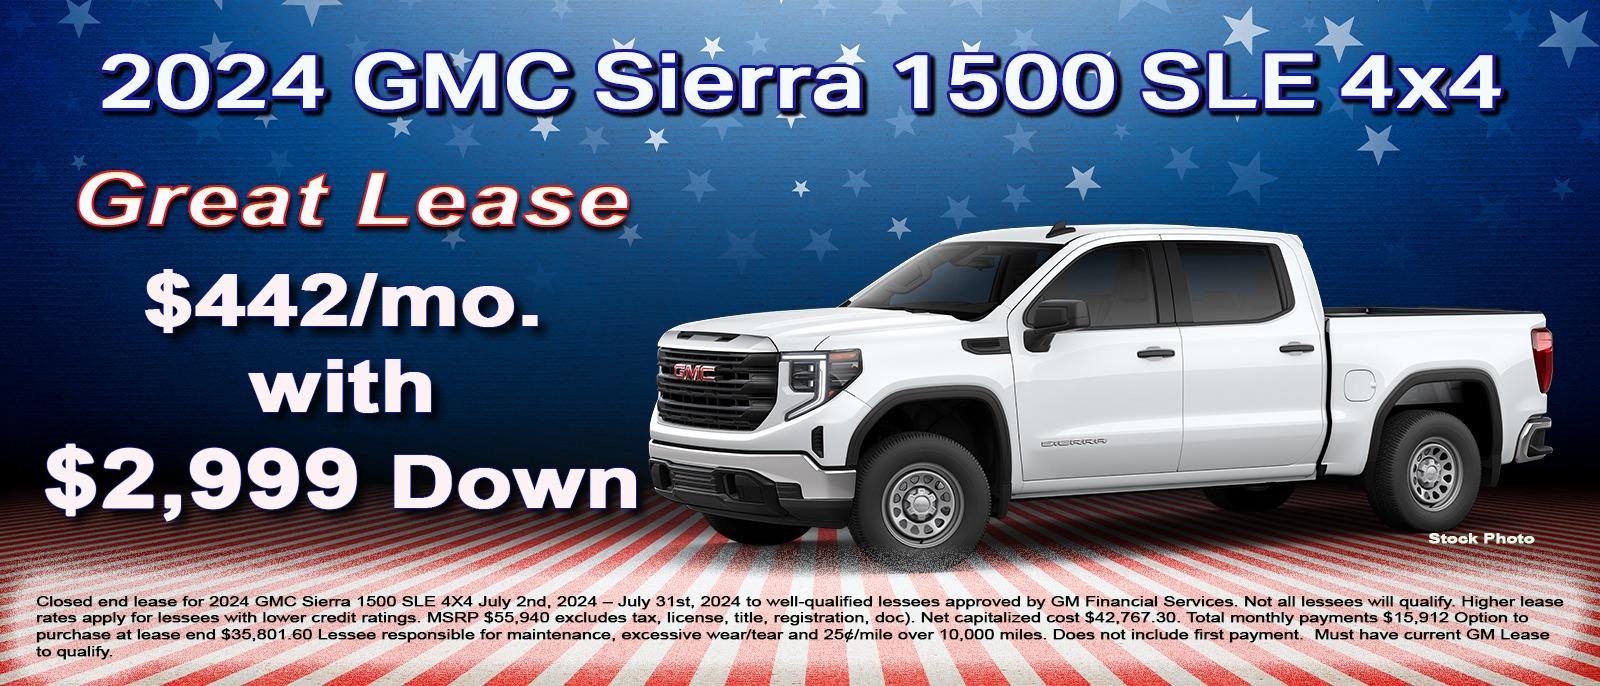 Lease your new GMC Sierra 1500 for only $442 per month